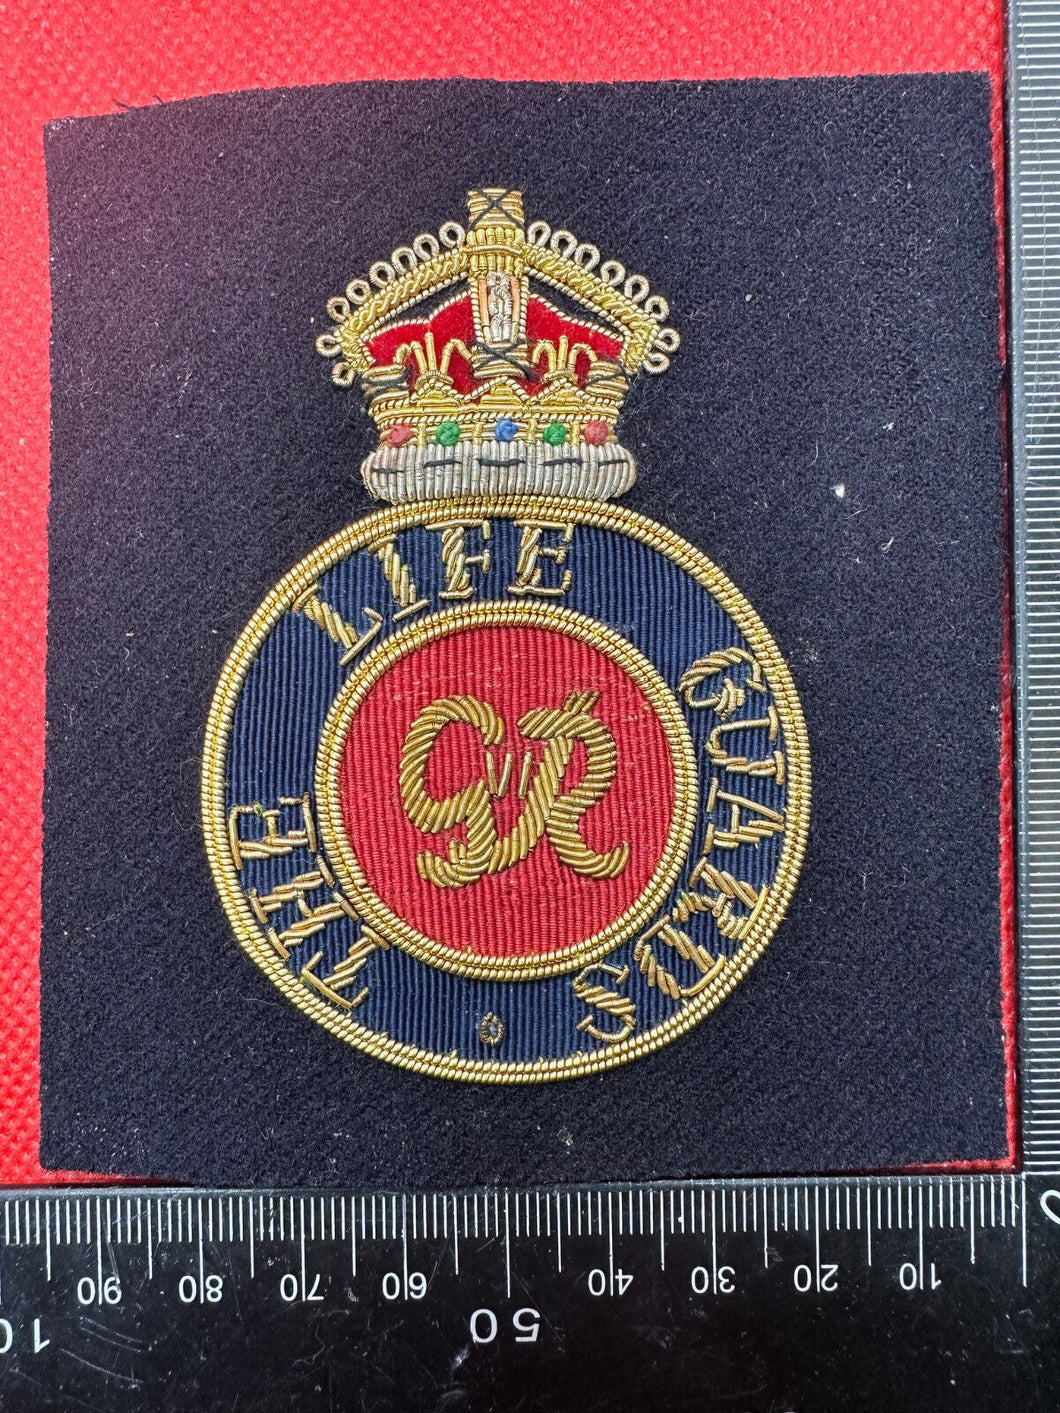 British Army Bullion Embroidered Blazer Badge - The Life Guards - King's Crown